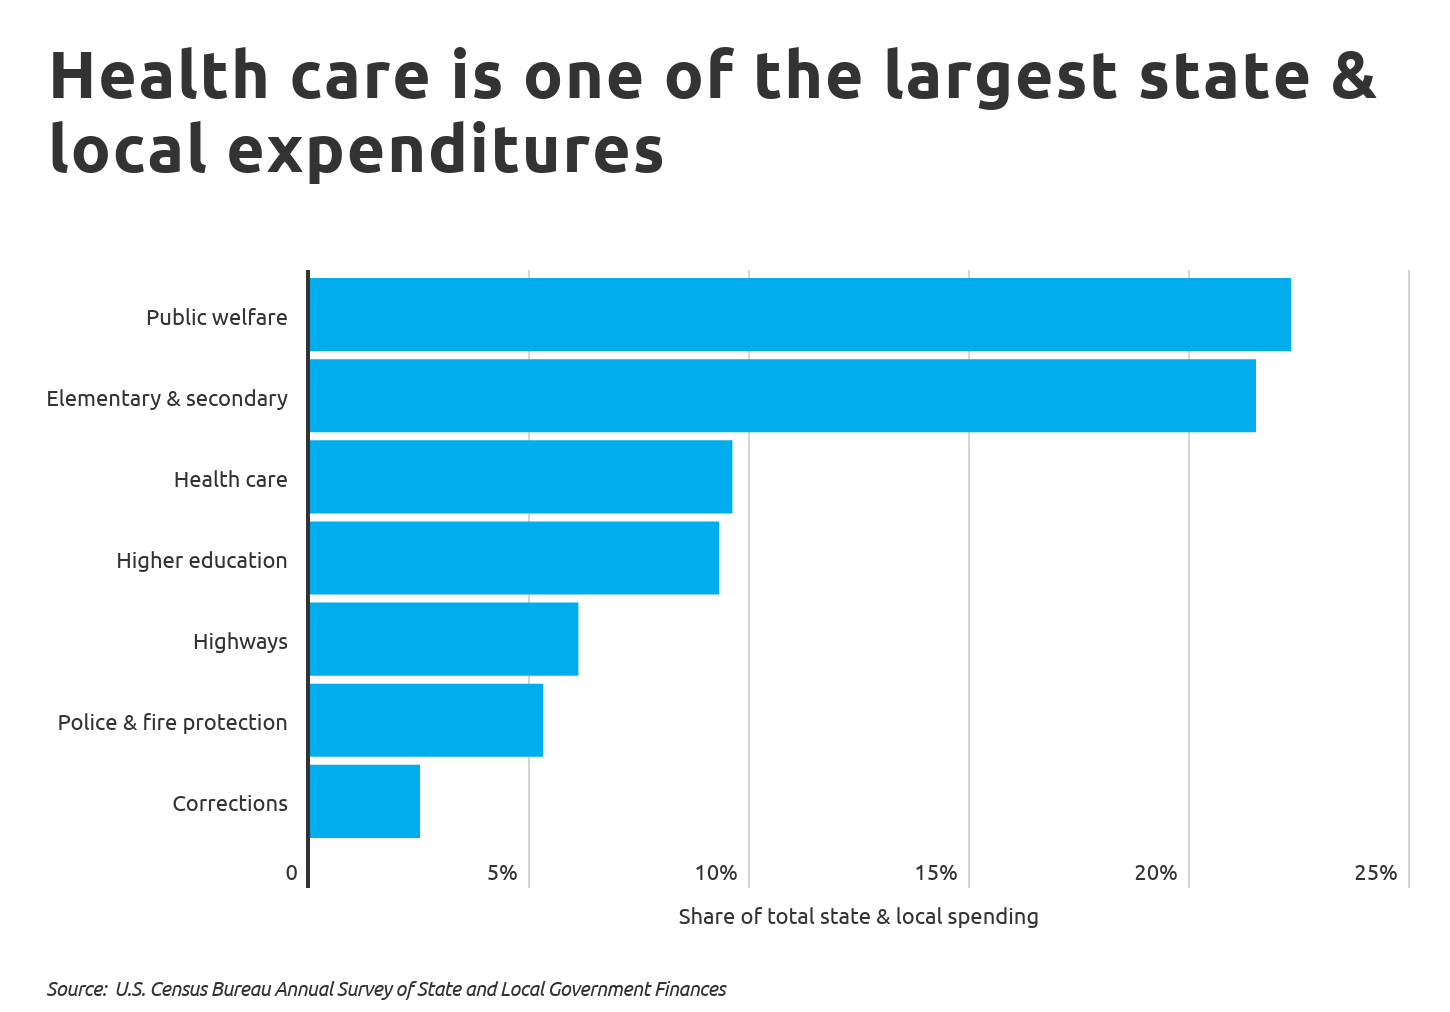 Health care is one of the largest state & local expenditures